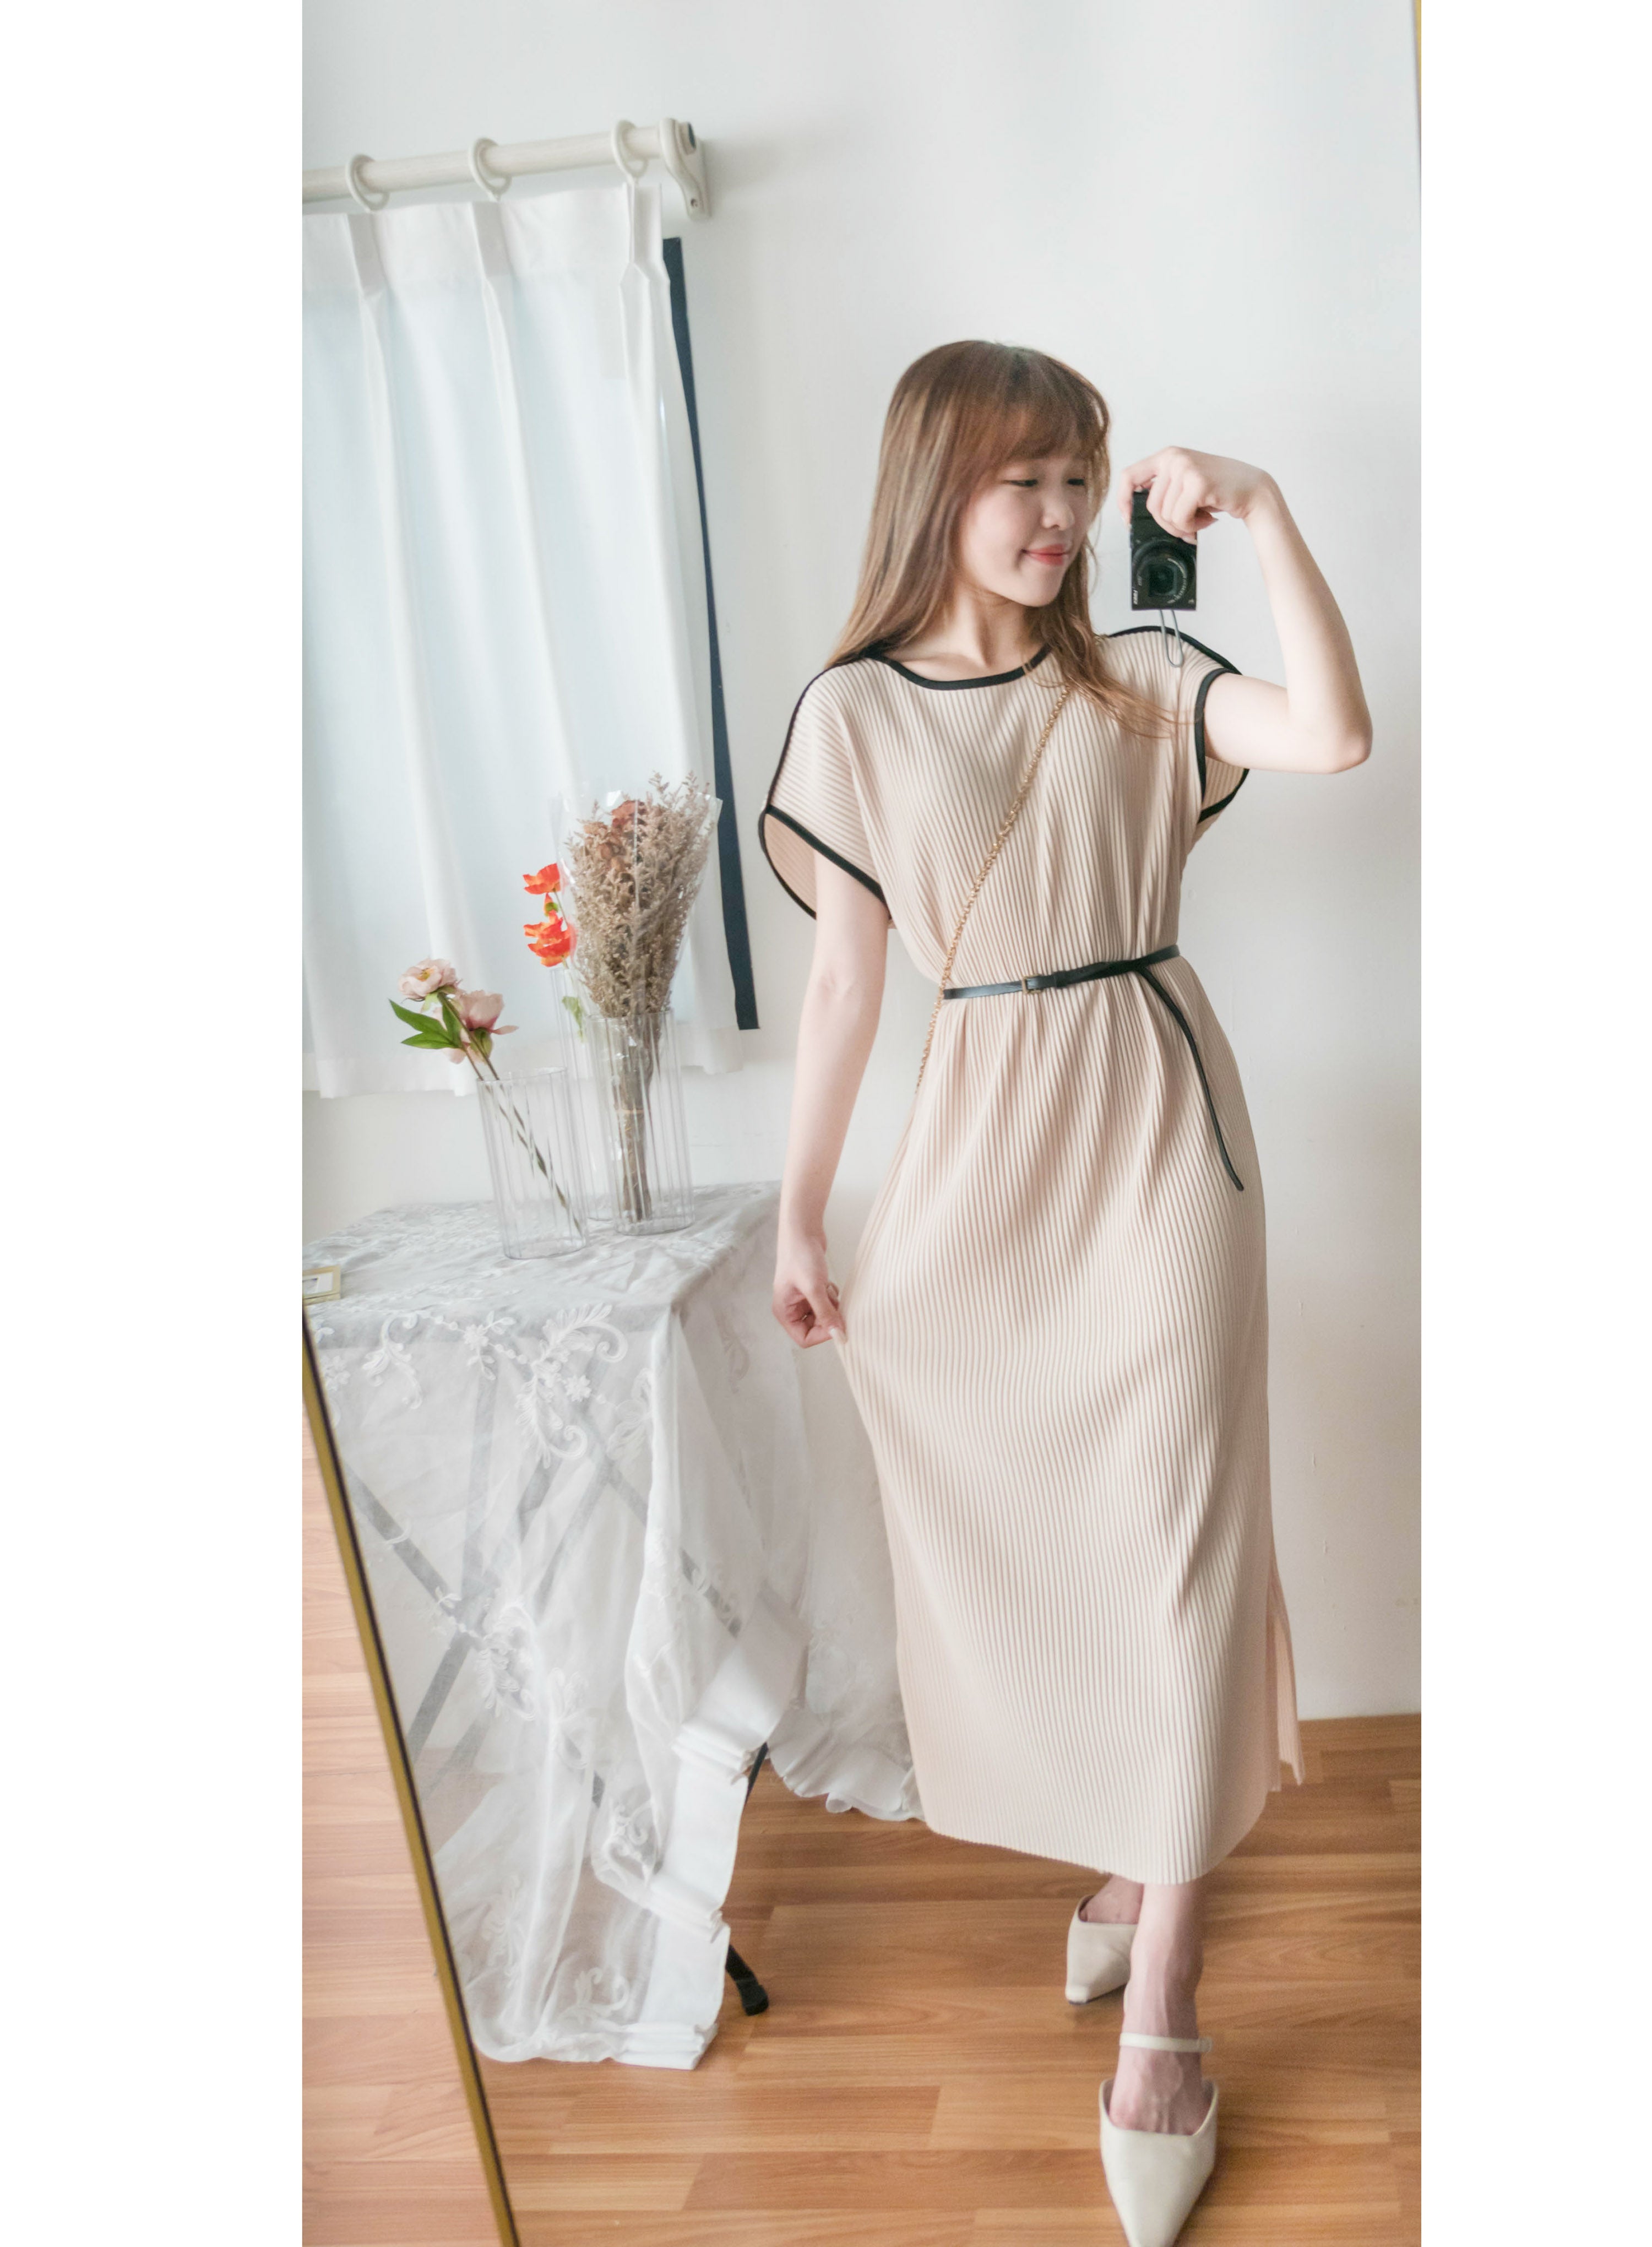 （BEIGE ONLY) Pleated Coco 輕優雅船領細百褶裙身闊鬆開叉, Dress/ DS9311